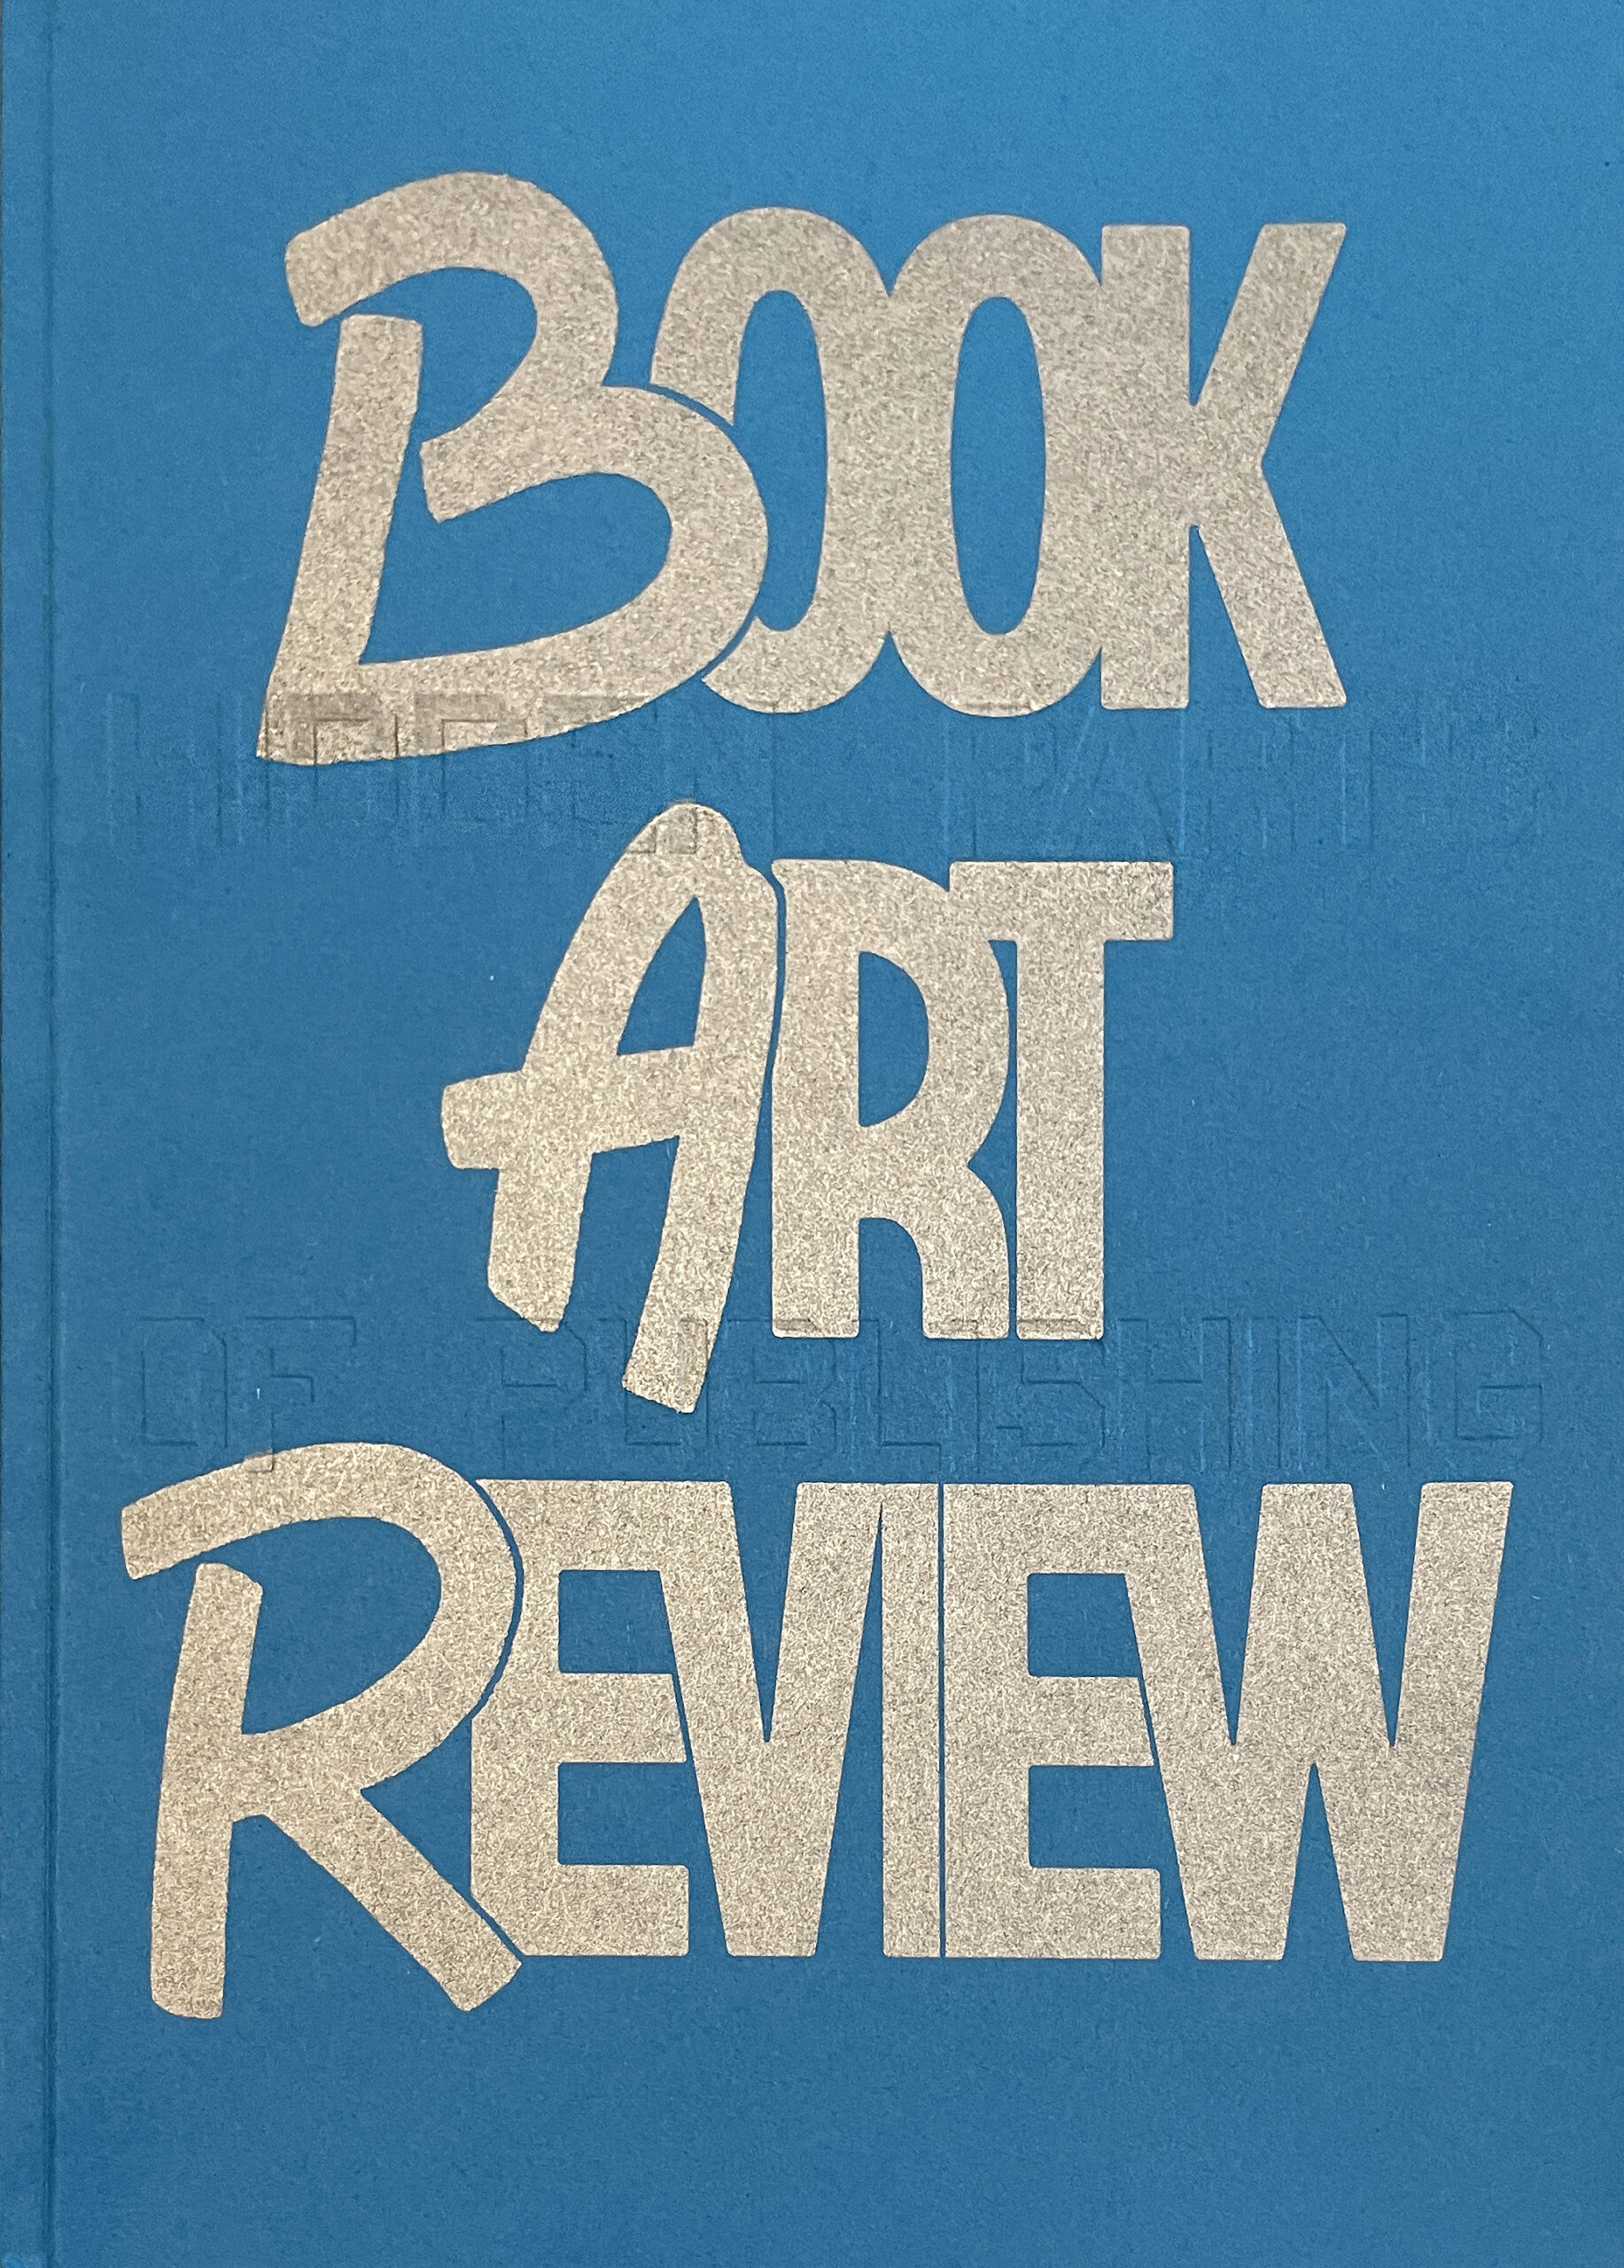 blue book cover with "Book Art Review" printed in silver and "the hidden parts of publishing" embossed